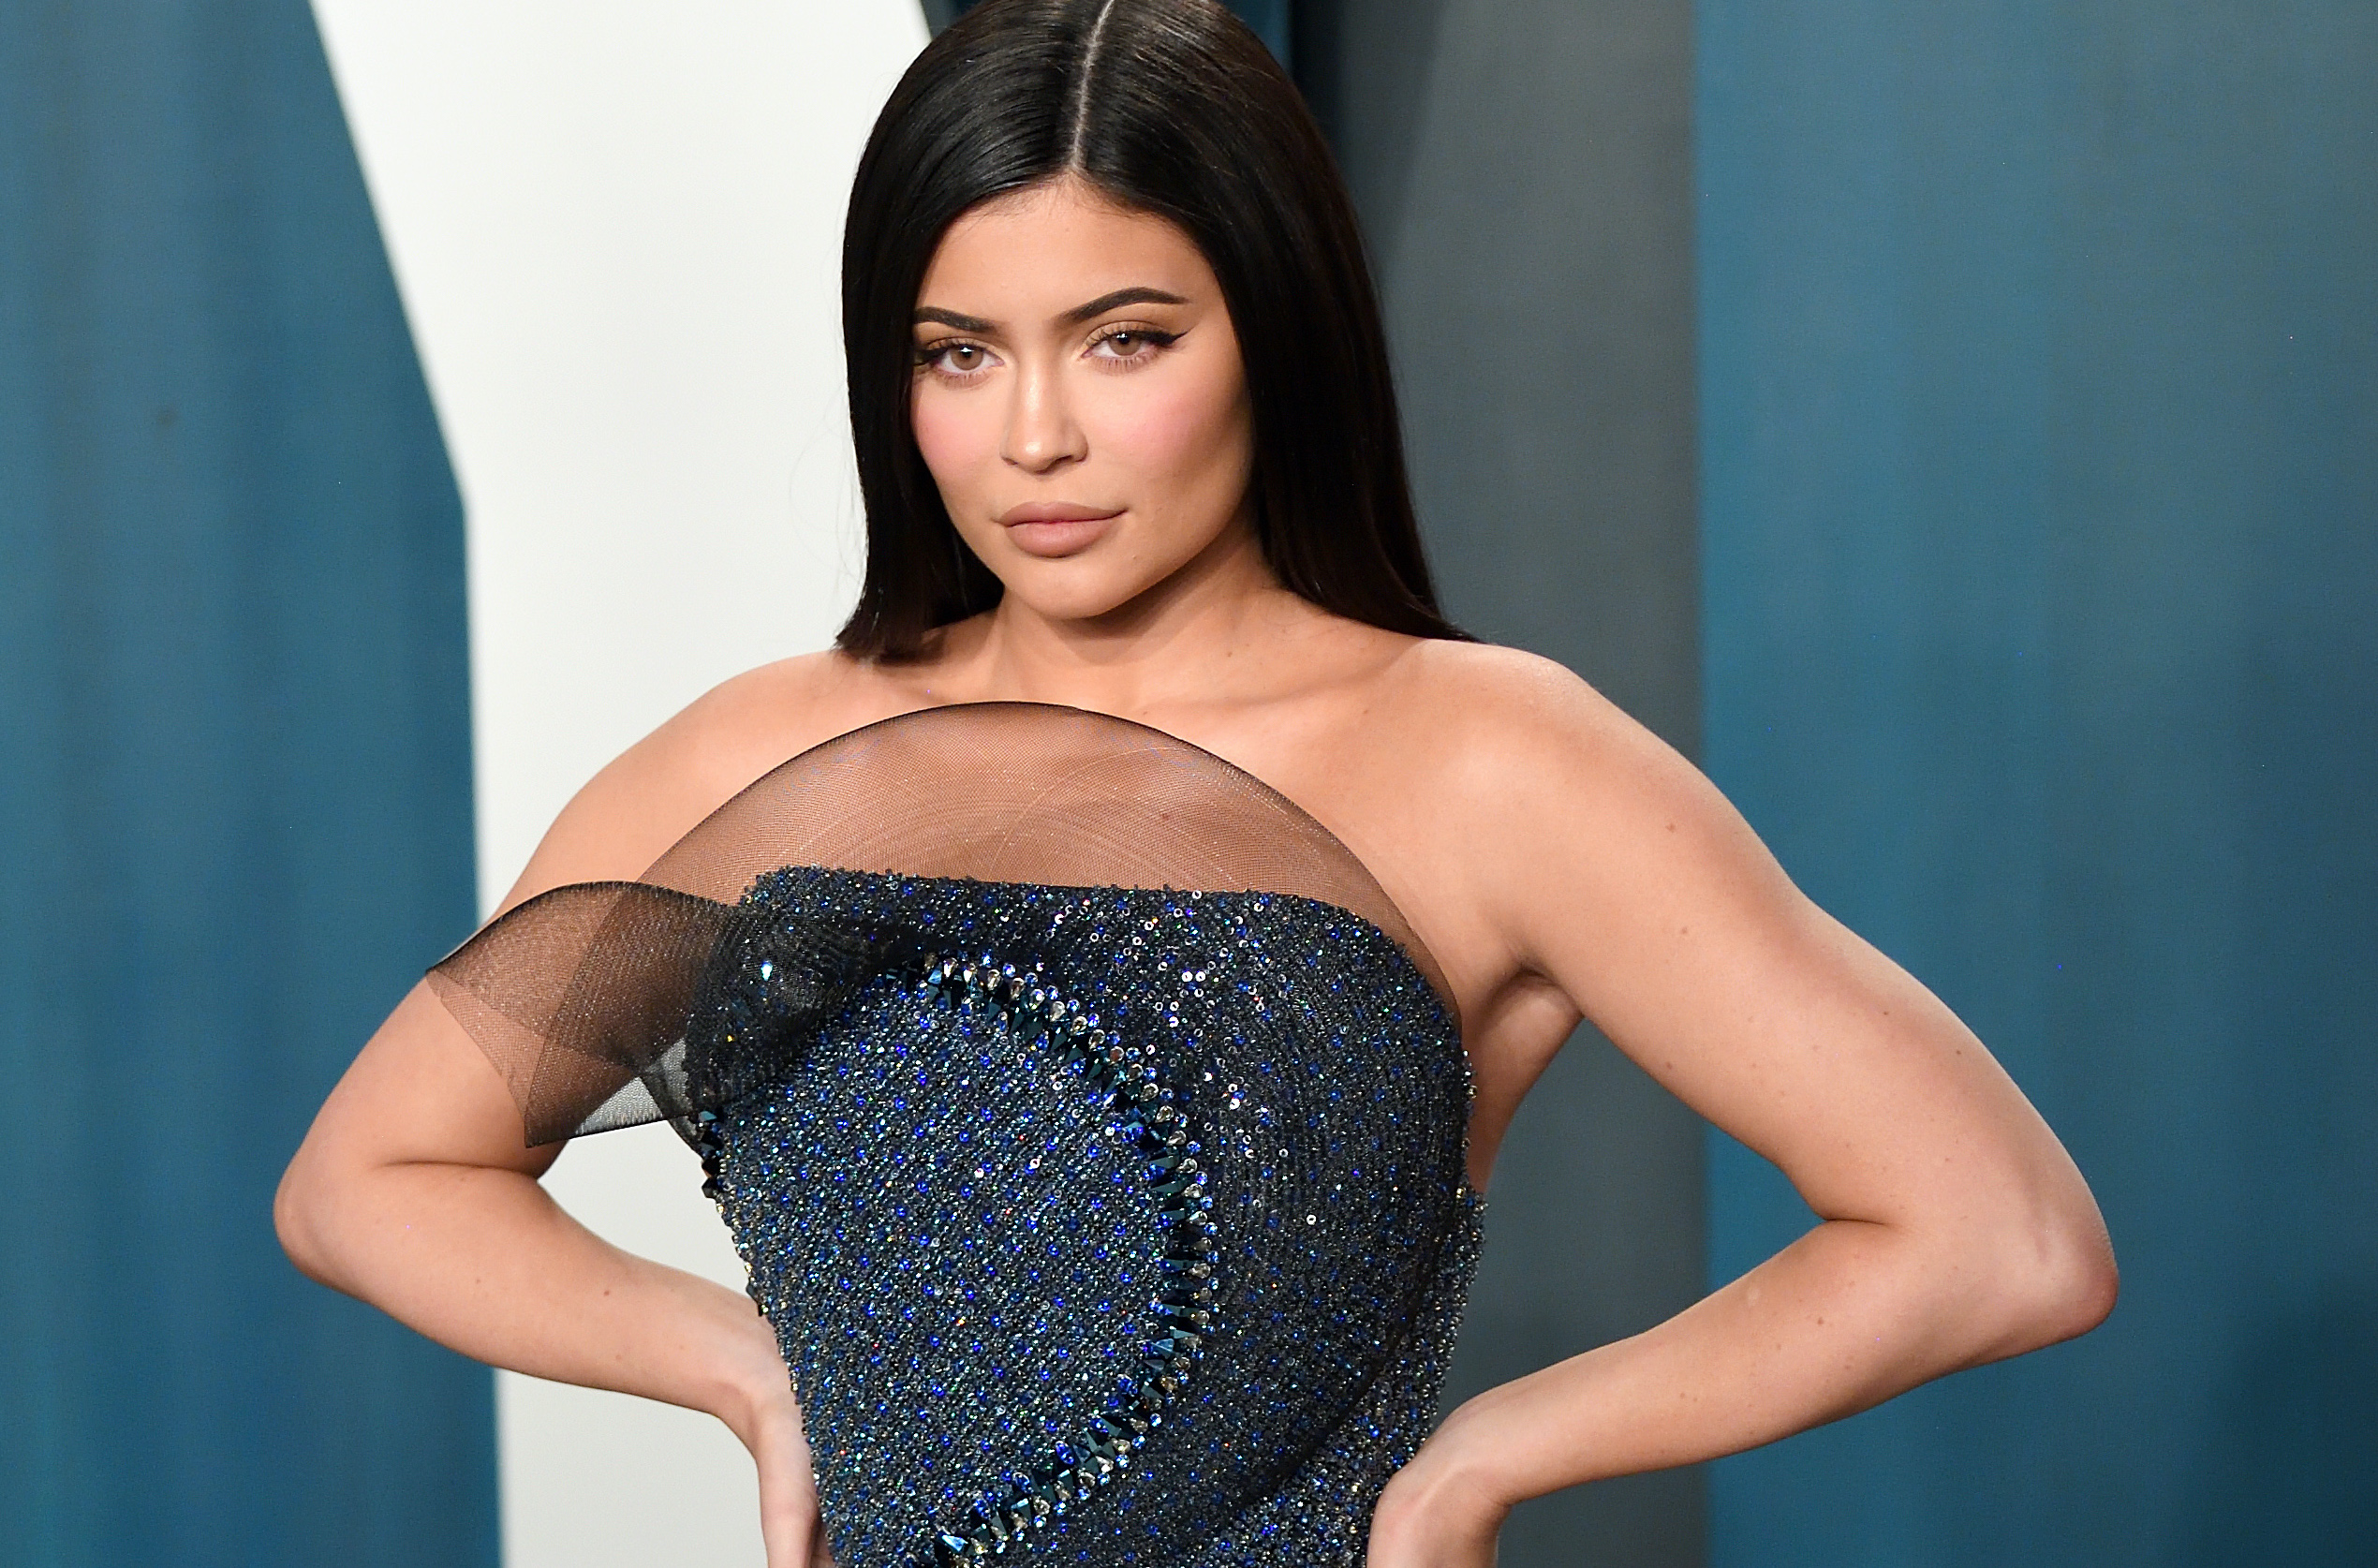 Kylie Jenner attends the 2020 Vanity Fair Oscar Party on Feb. 9, 2020 in Beverly Hills, California. (Karwai Tang—Getty Images)